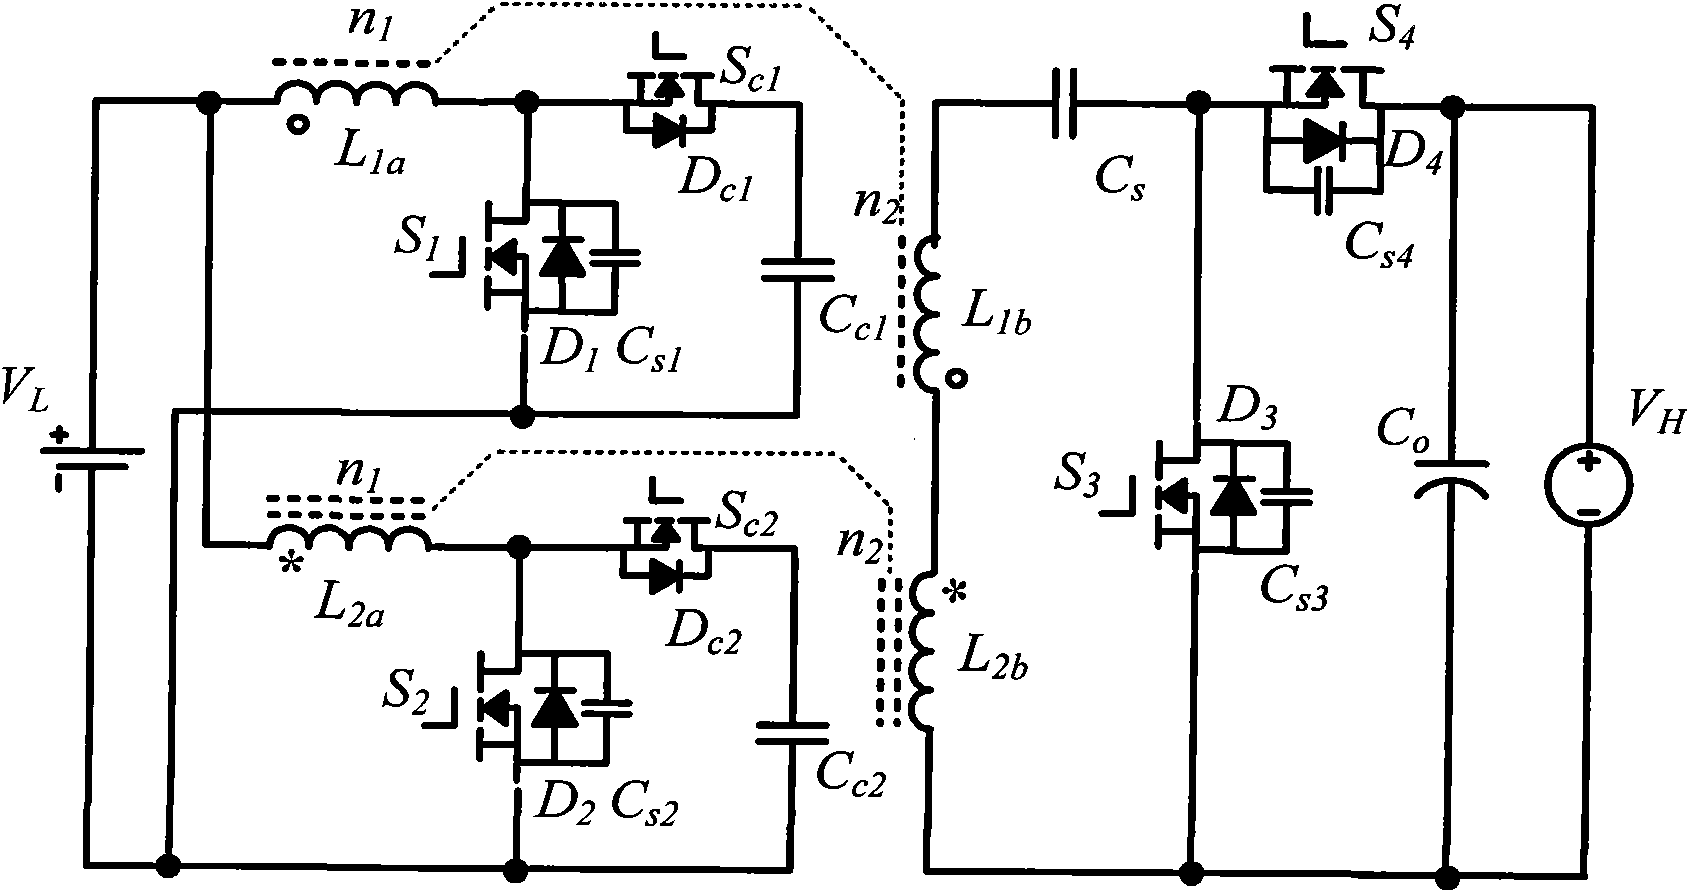 Isolated bidirectional DC-DC converter realized by coupling inductor